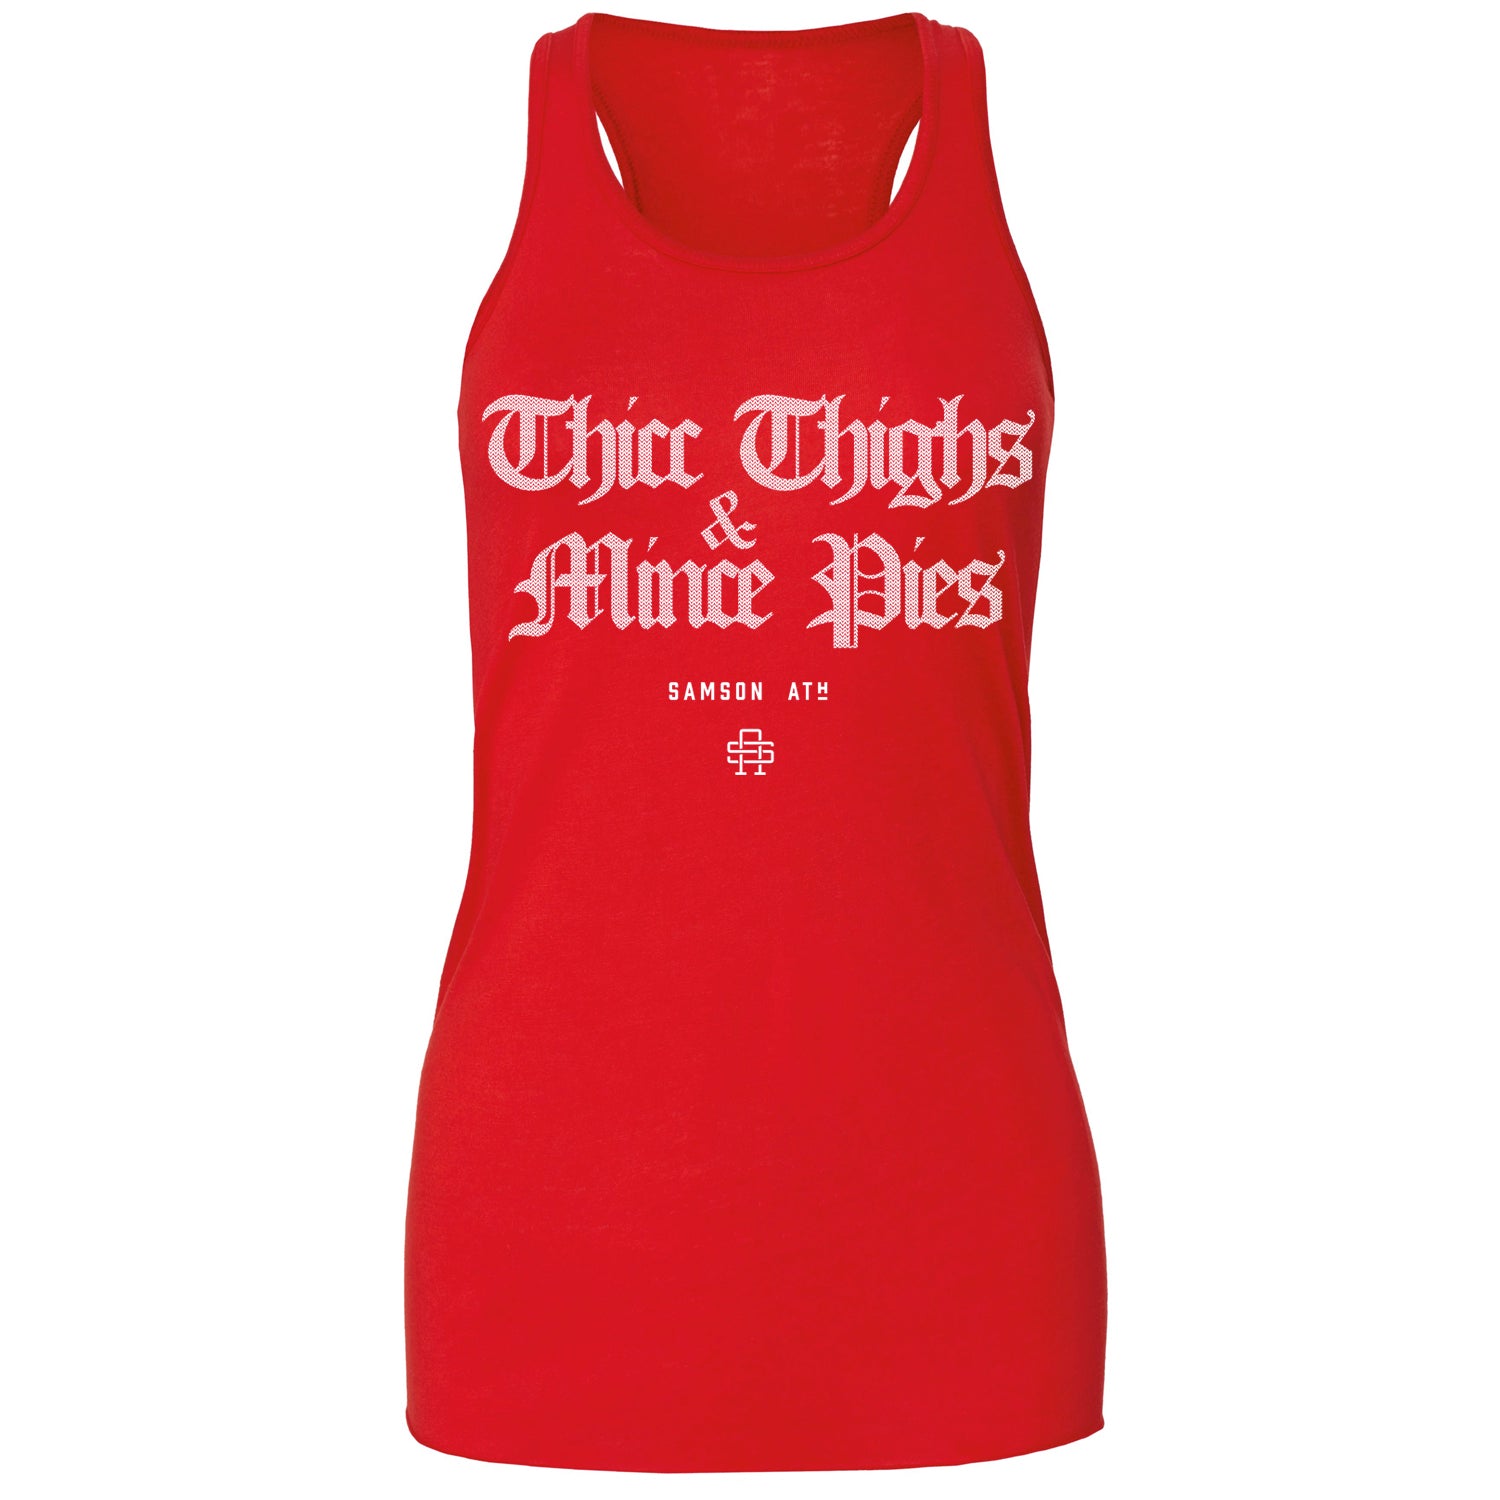 Thicc Thighs & Mince Pies - Christmas Ladies Tank